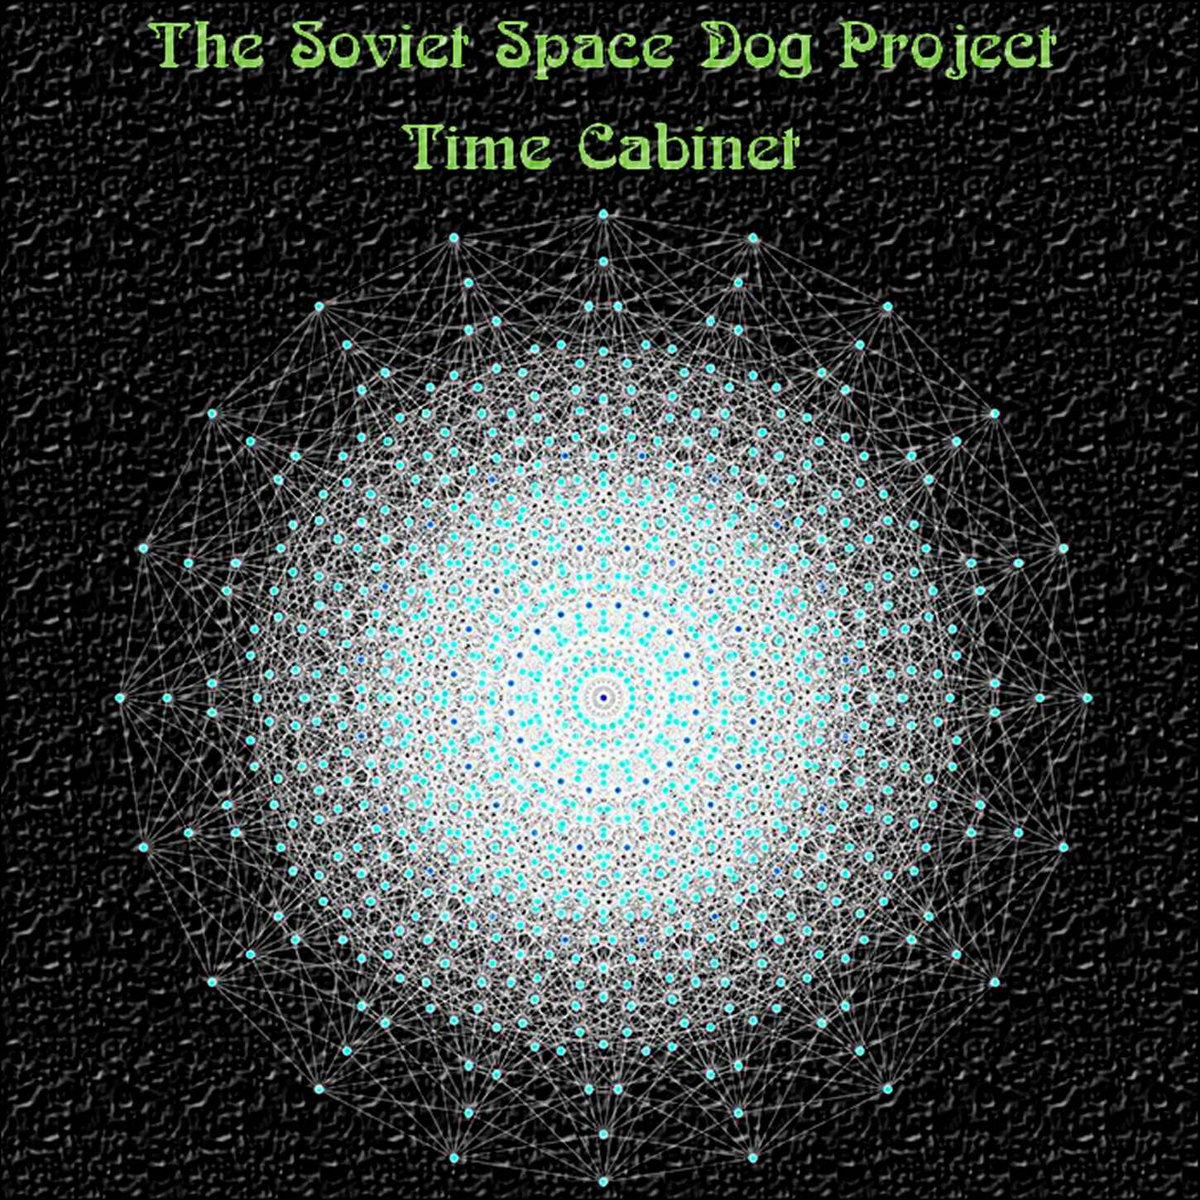 The Soviet Space Dog Project - Time Cabinet (2019) [FLAC 24bit/44,1kHz] Download